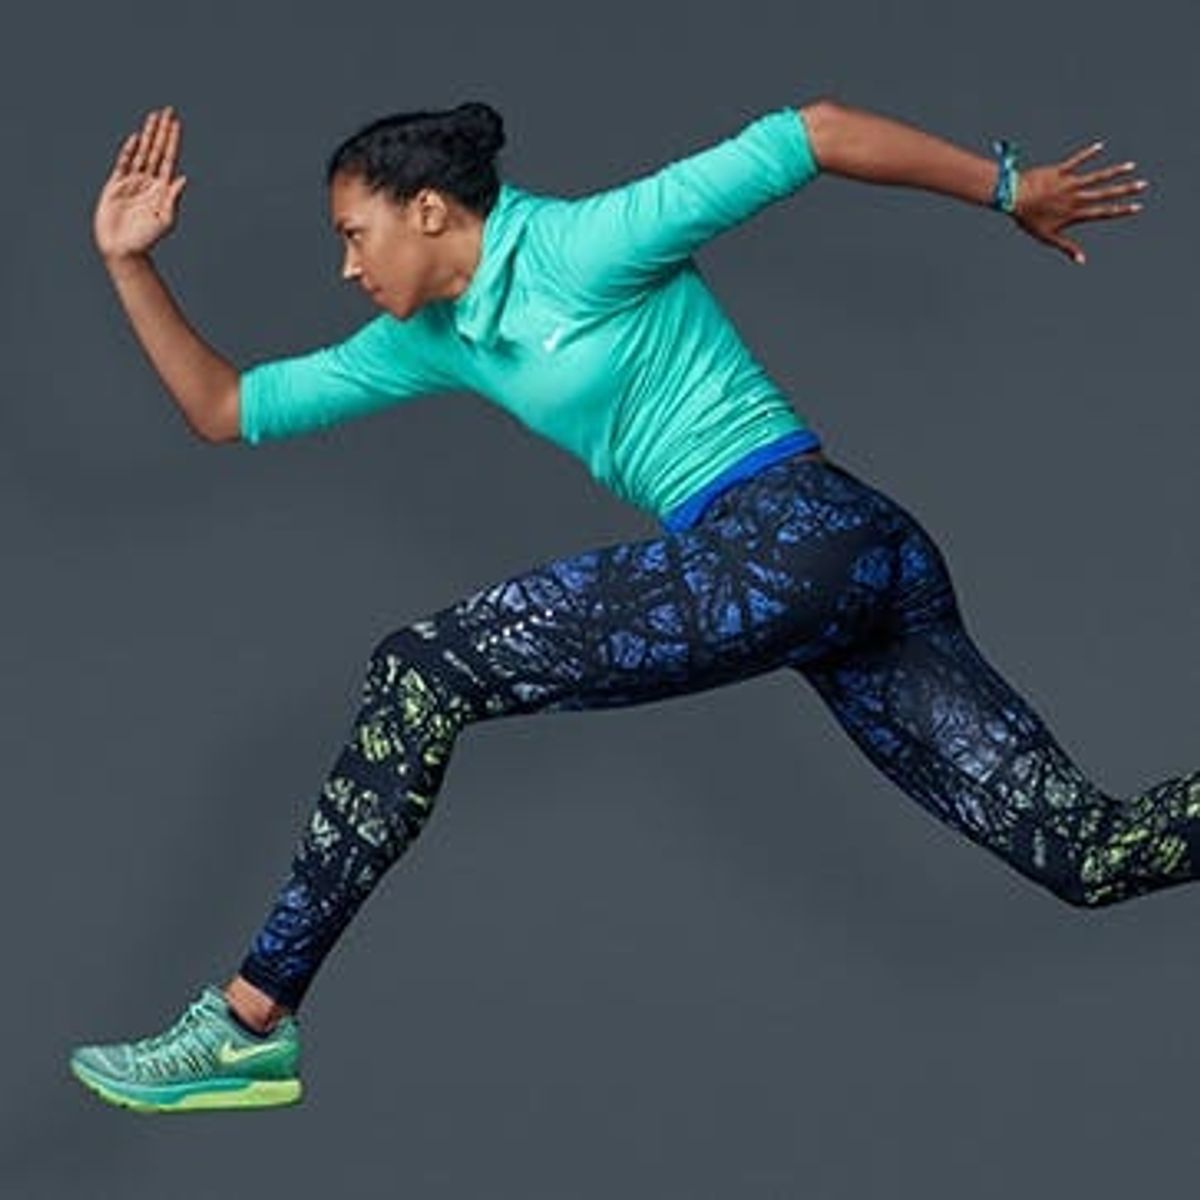 Nike’s New Fall Collection Will Make You Want to Work Out